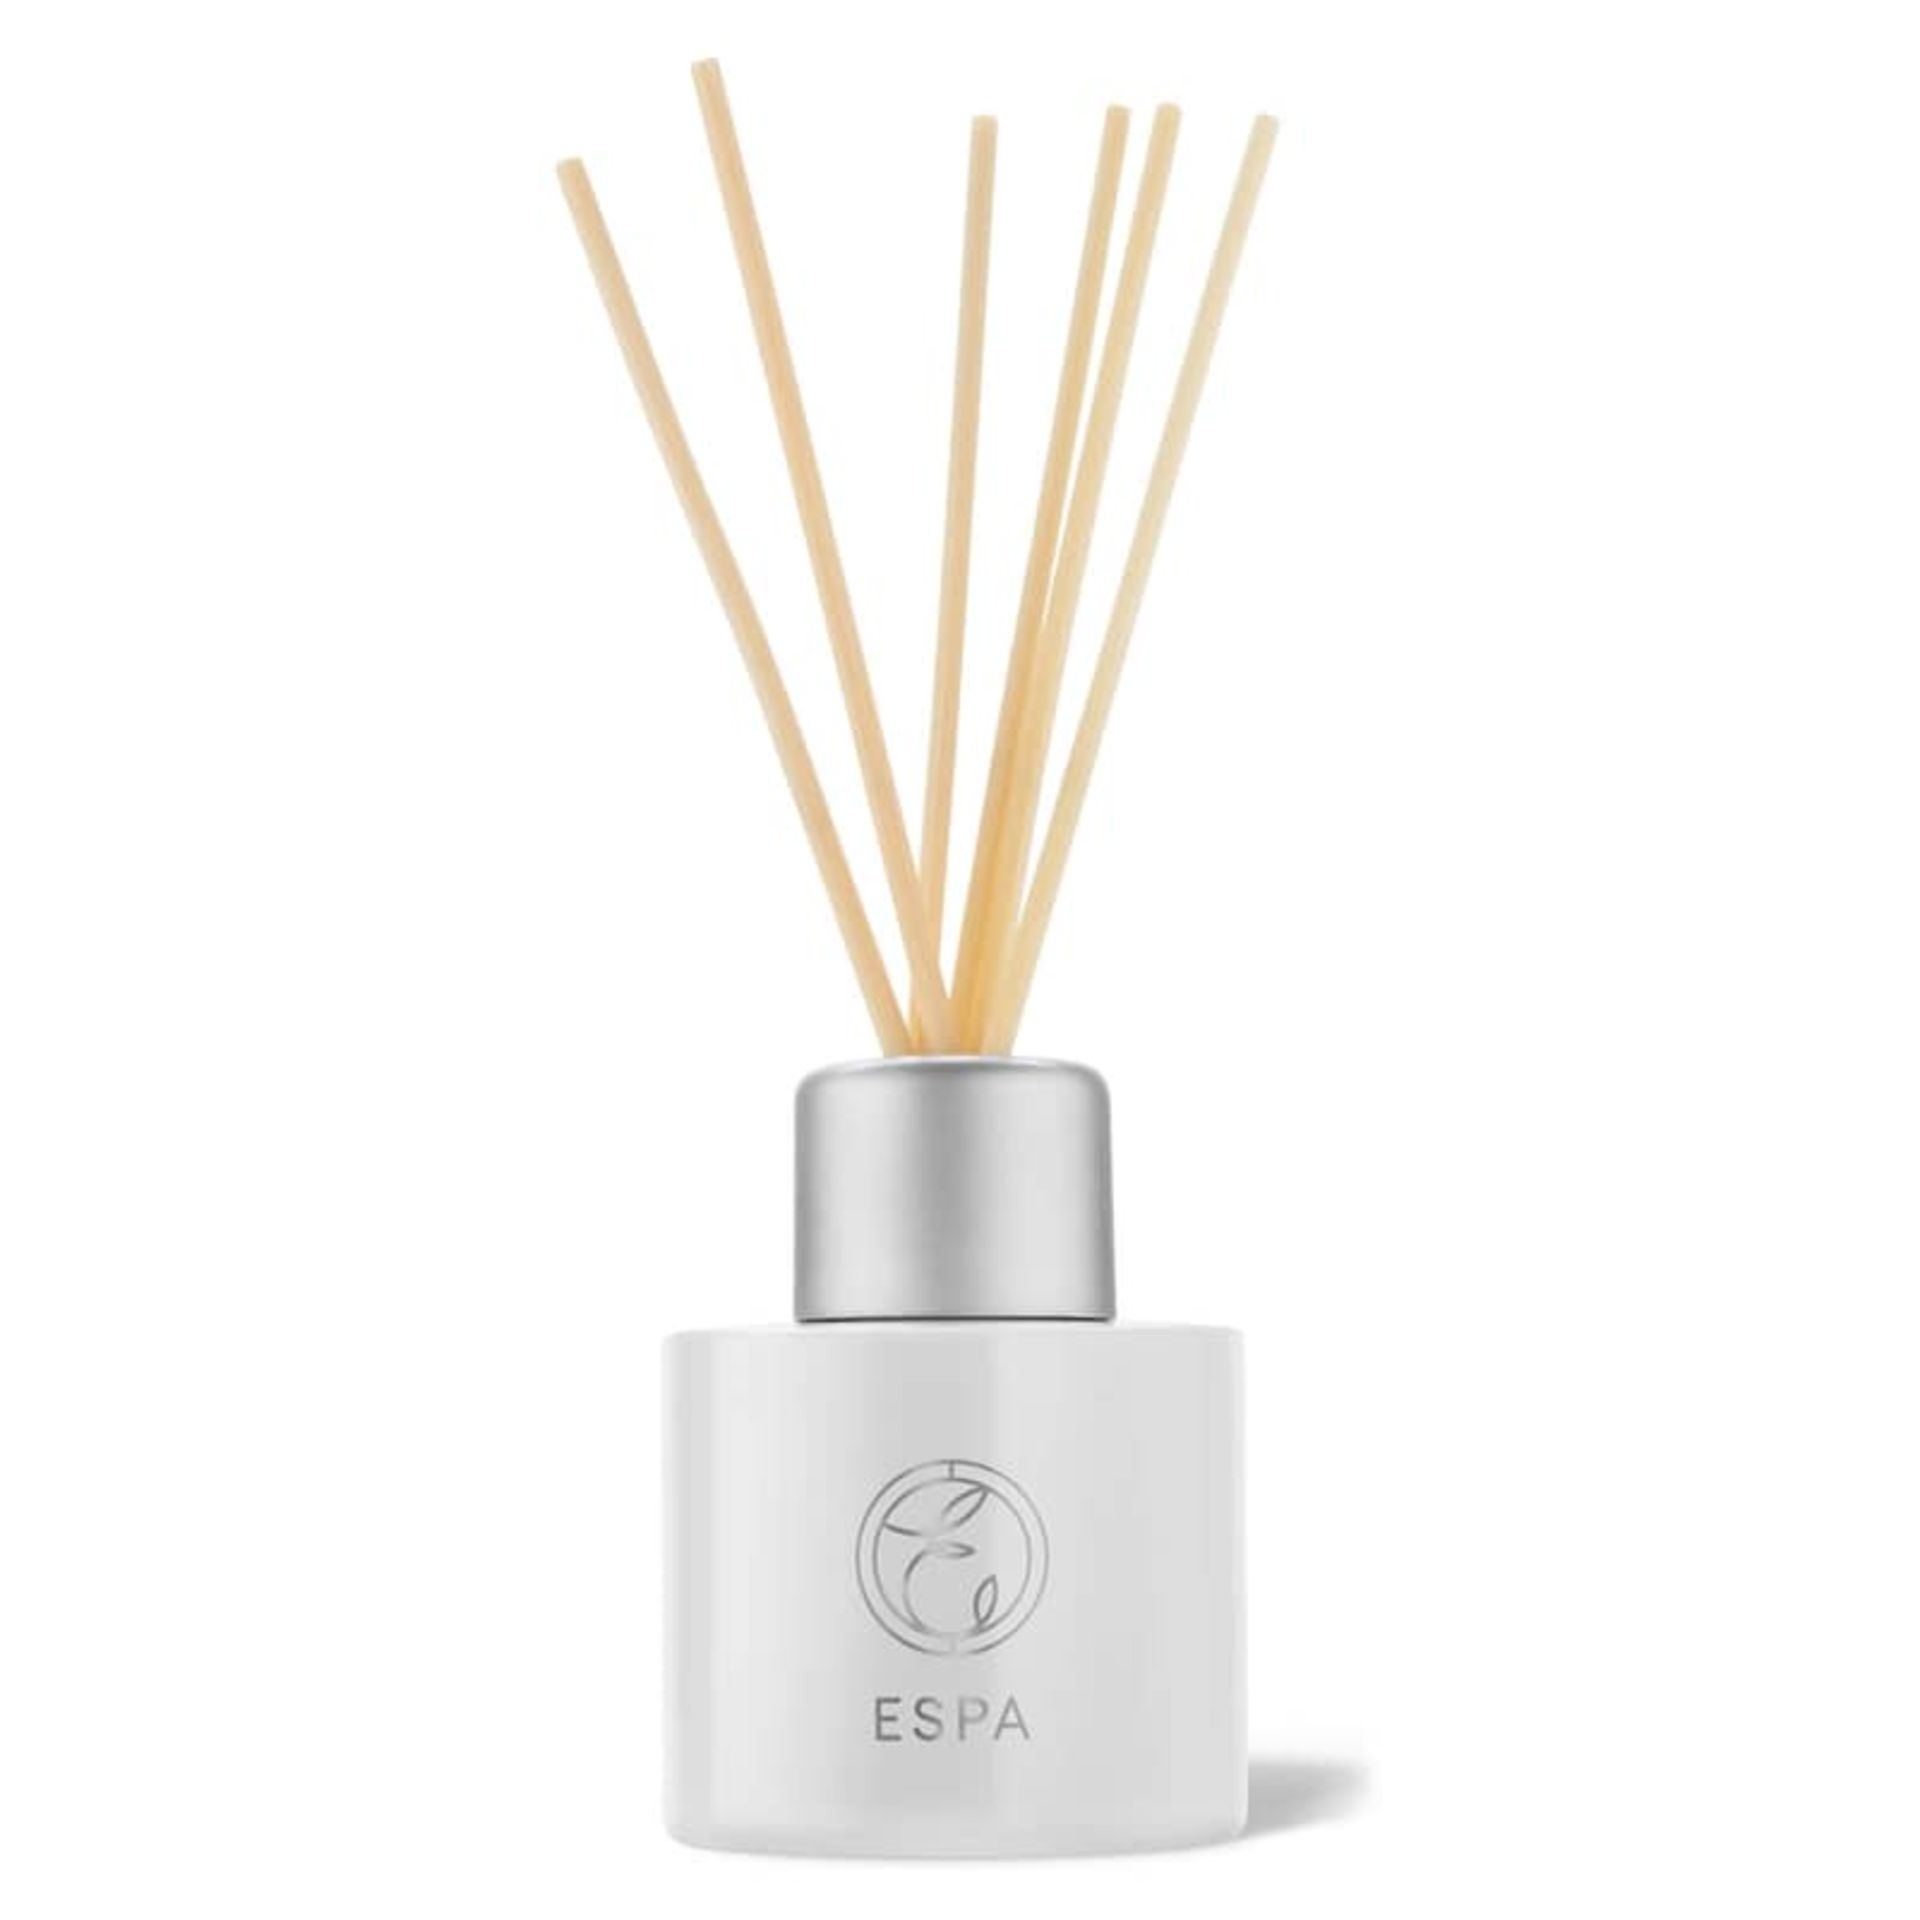 BRAND NEW ESPA POSITIVITY AROMATIC REED DIFFUSER 200ML RRP £299 R12-15